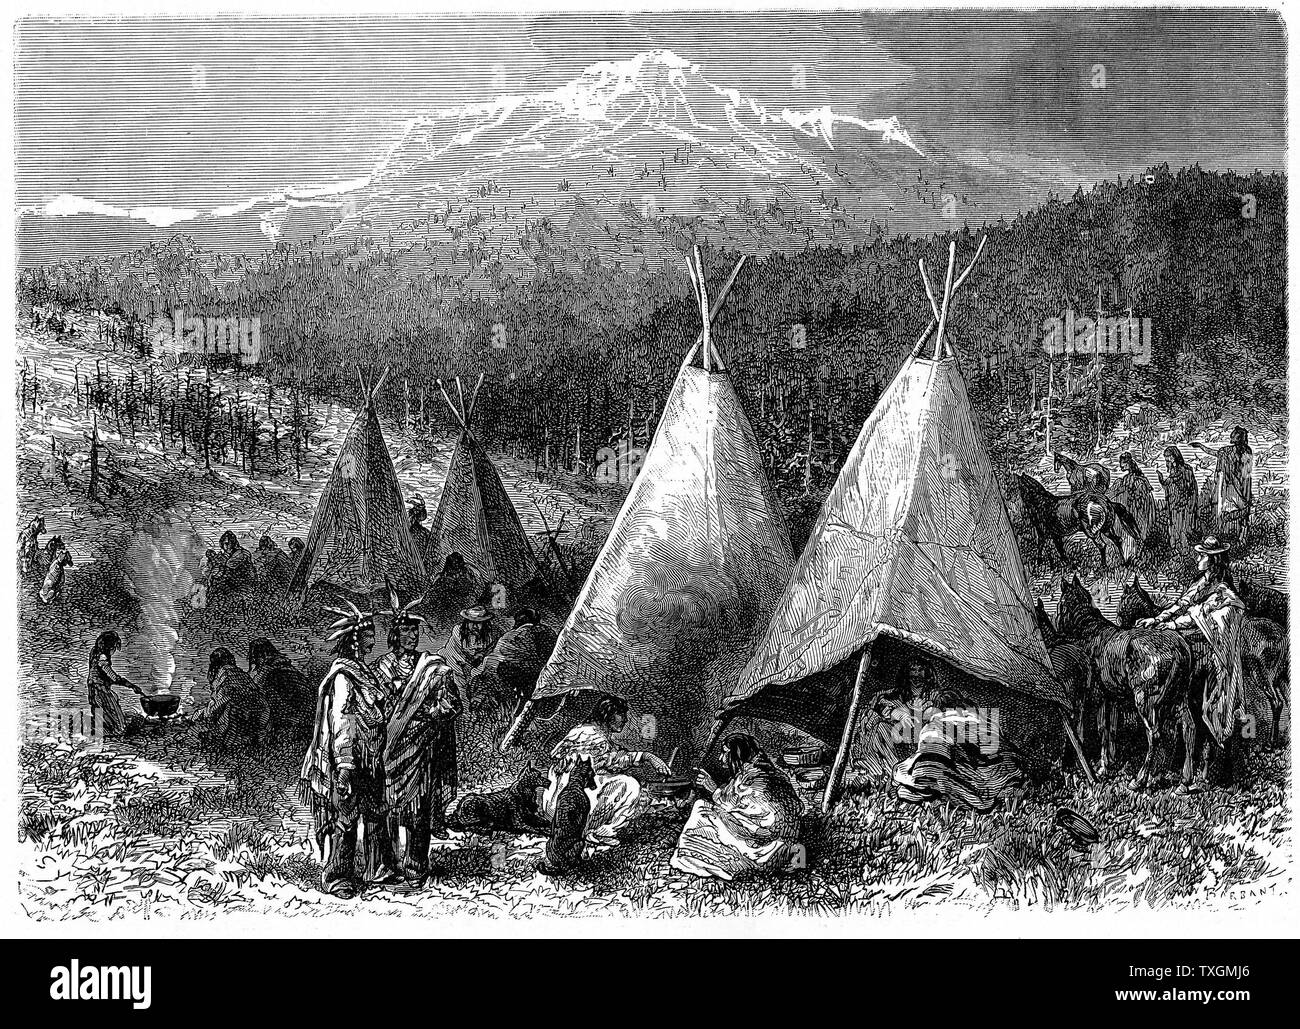 North America Indian encampment in Oklahoma Indian territory. Wood engraving published in Paris, 1889 Stock Photo